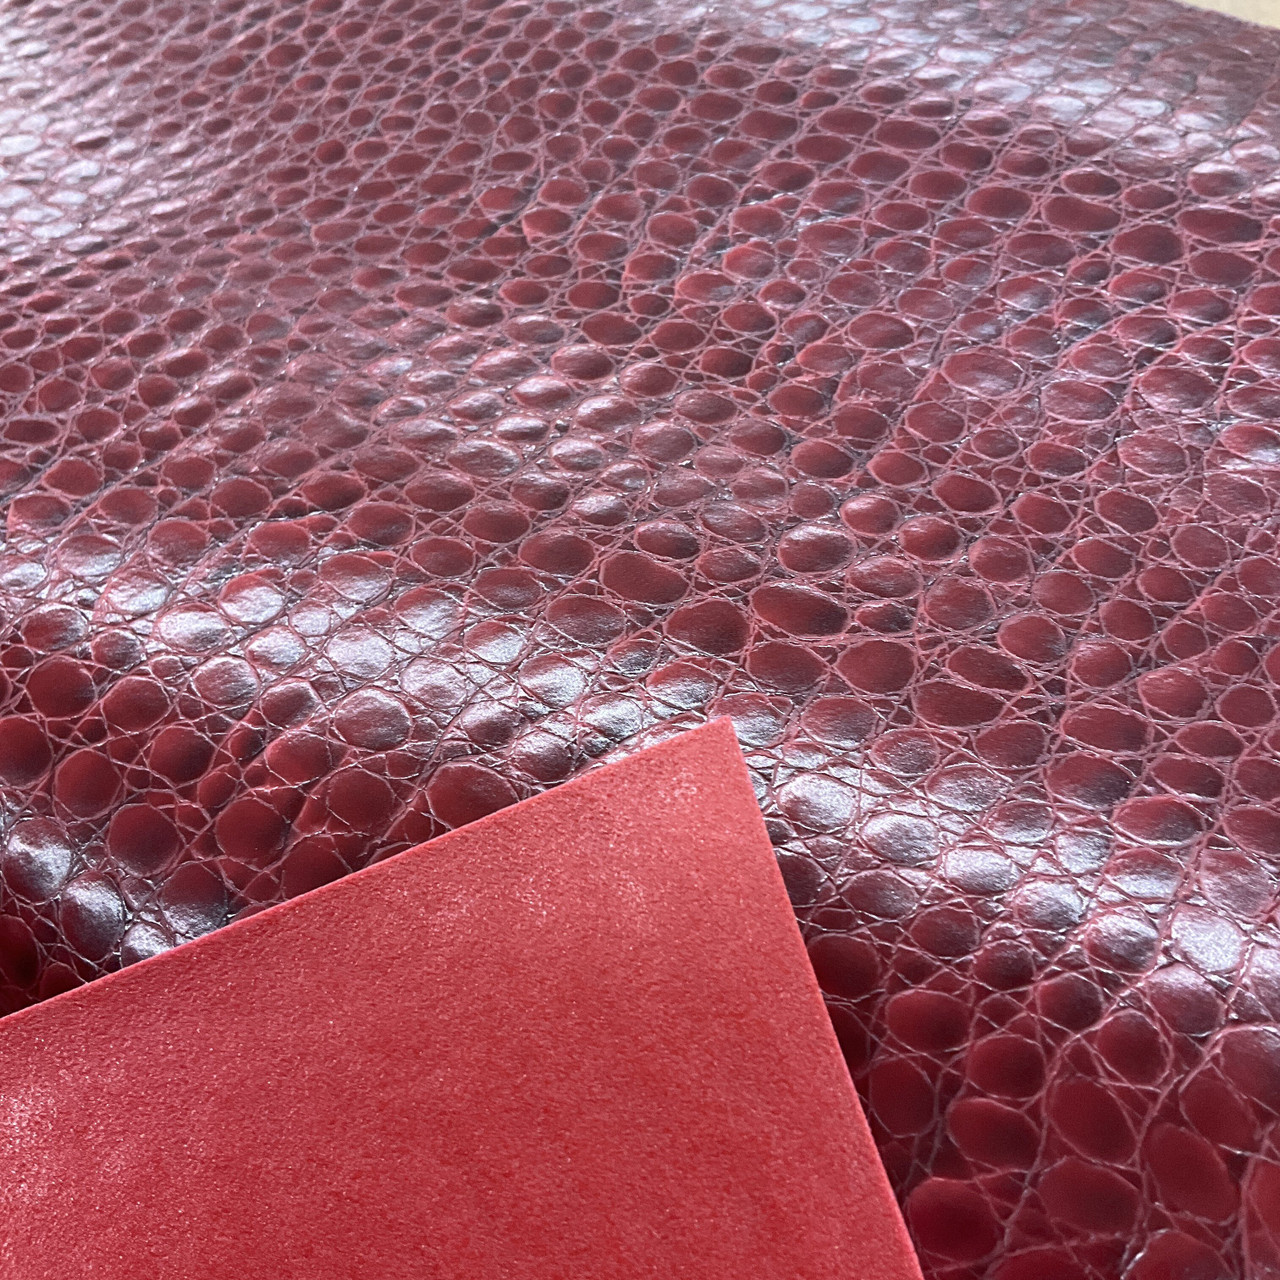 Textured Snake Skin Vinyl Faux Leather Fabric For Upholstery & Vehicle  Trimmings